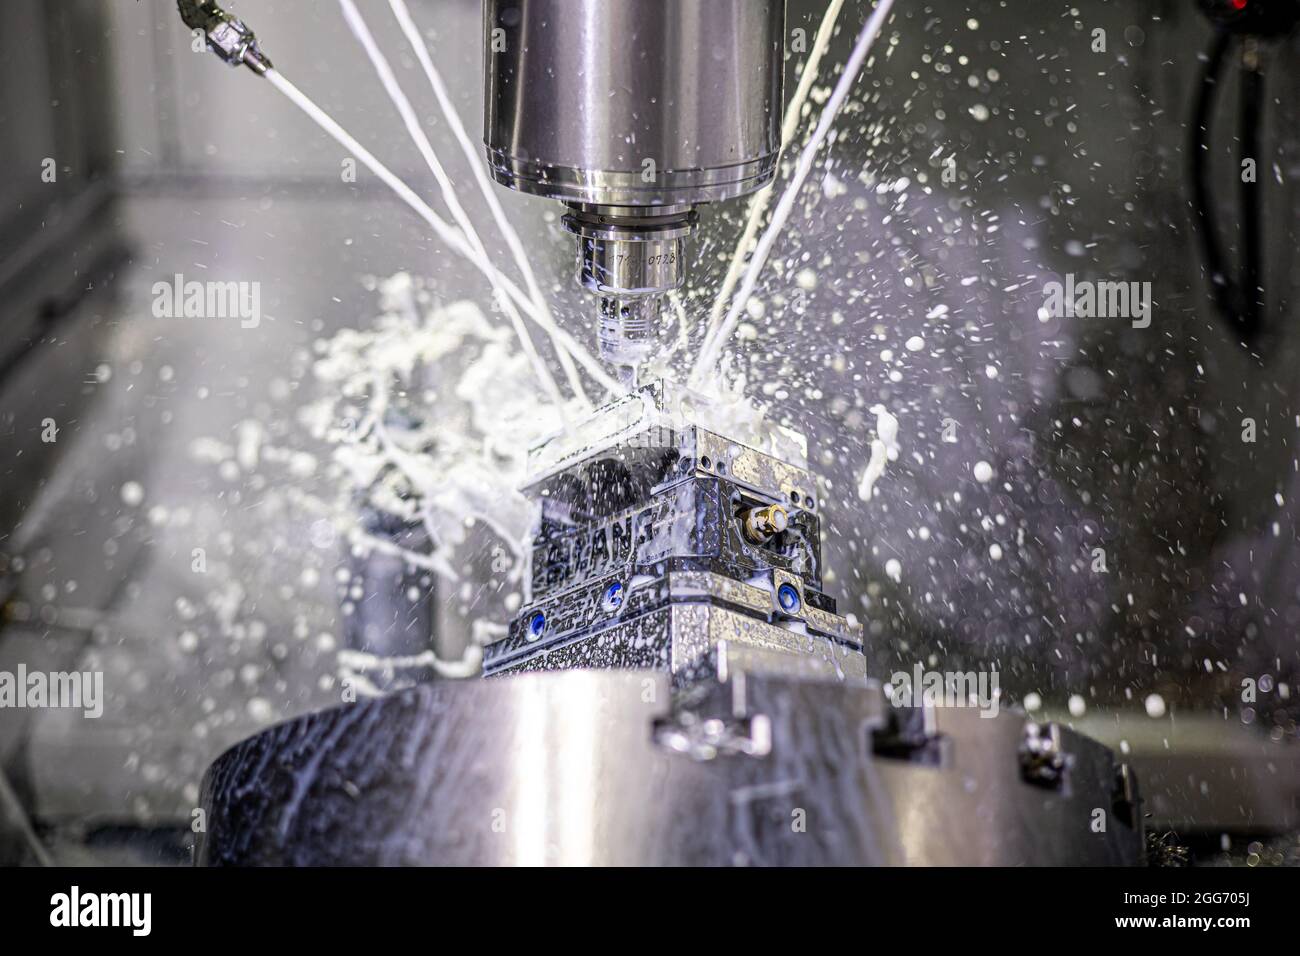 5-axis cnc milling Stock Photo